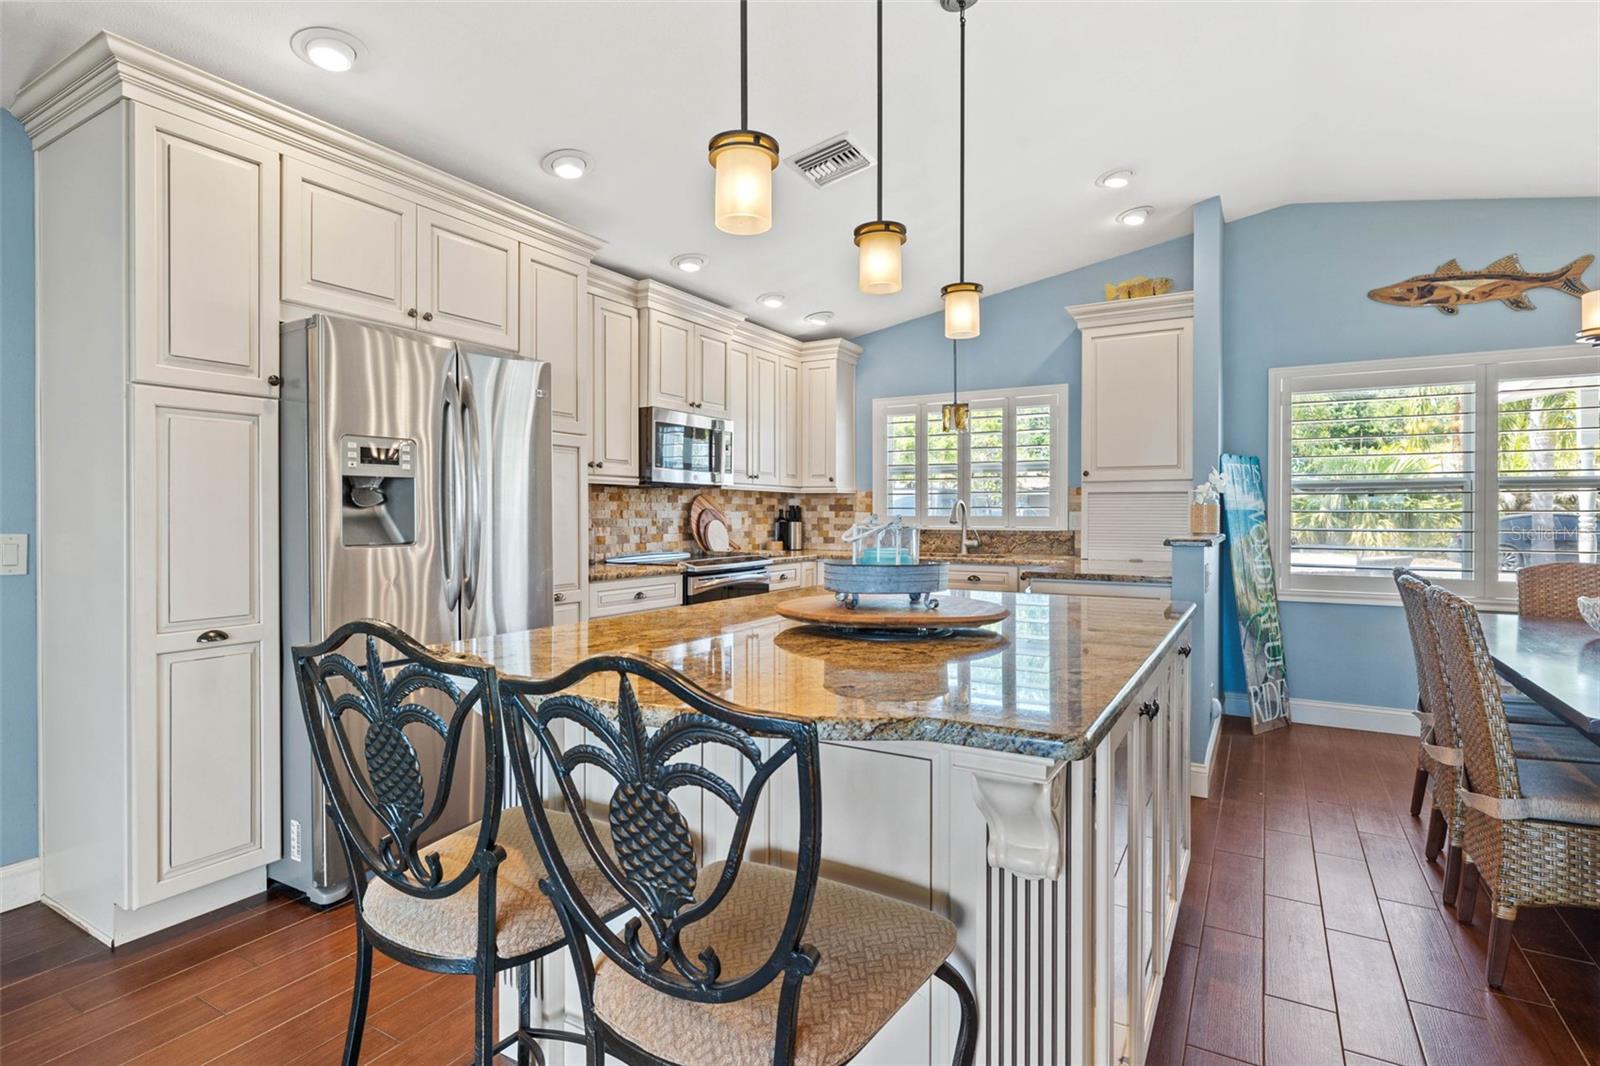 High ceilings, light and bright and KraftMaid custom cabinetry!